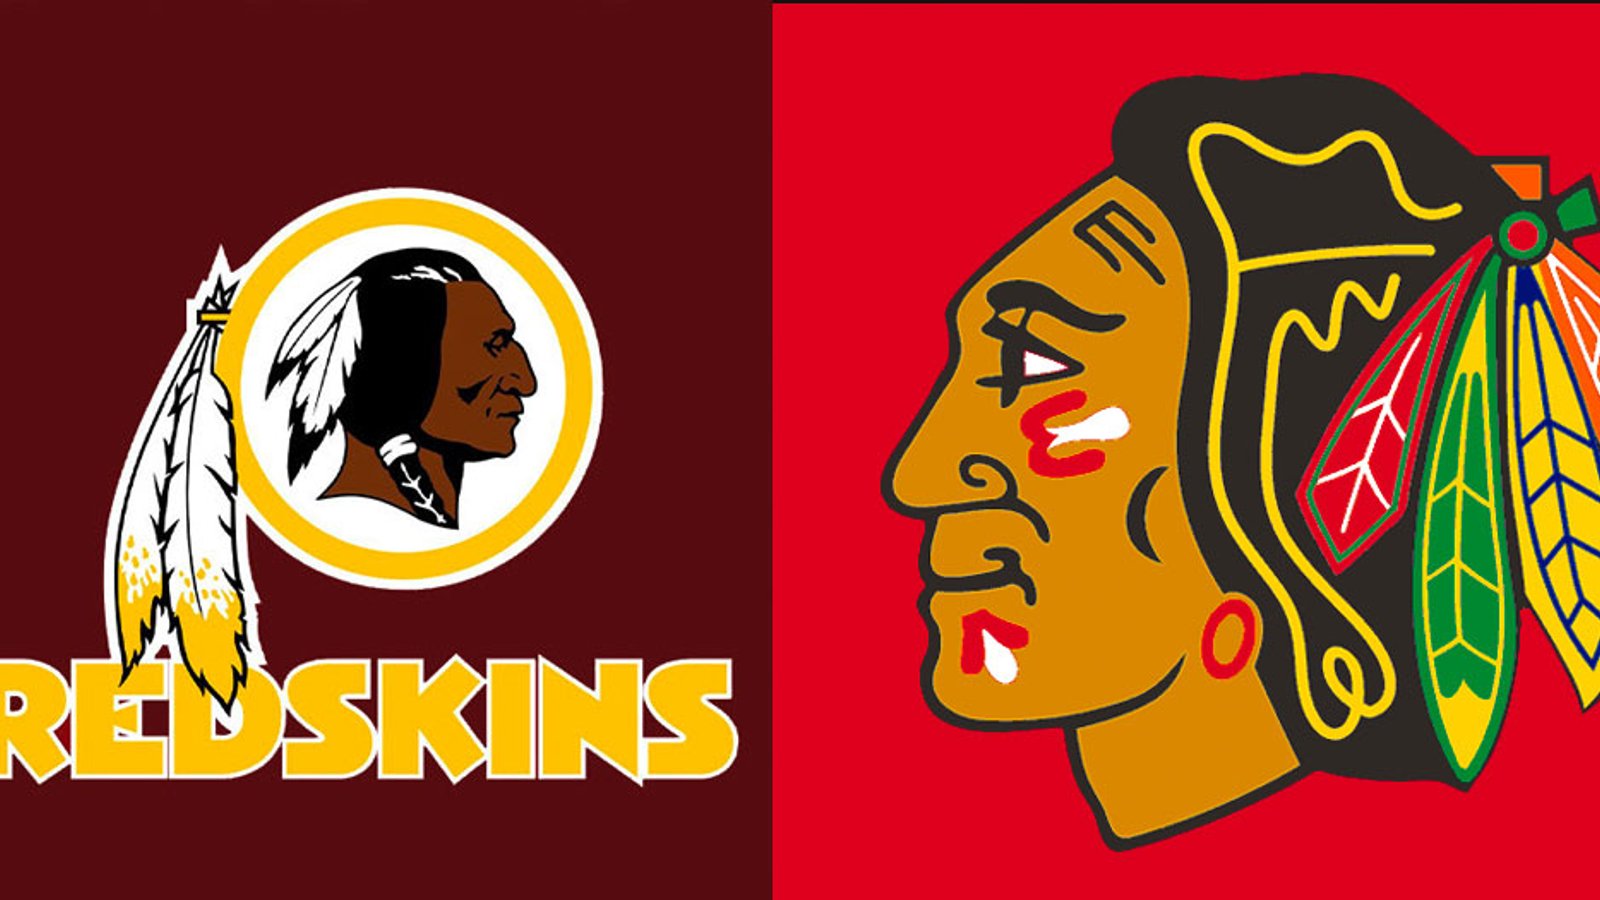 NFL’s Redkins will review team name: Hawks to follow suit? 